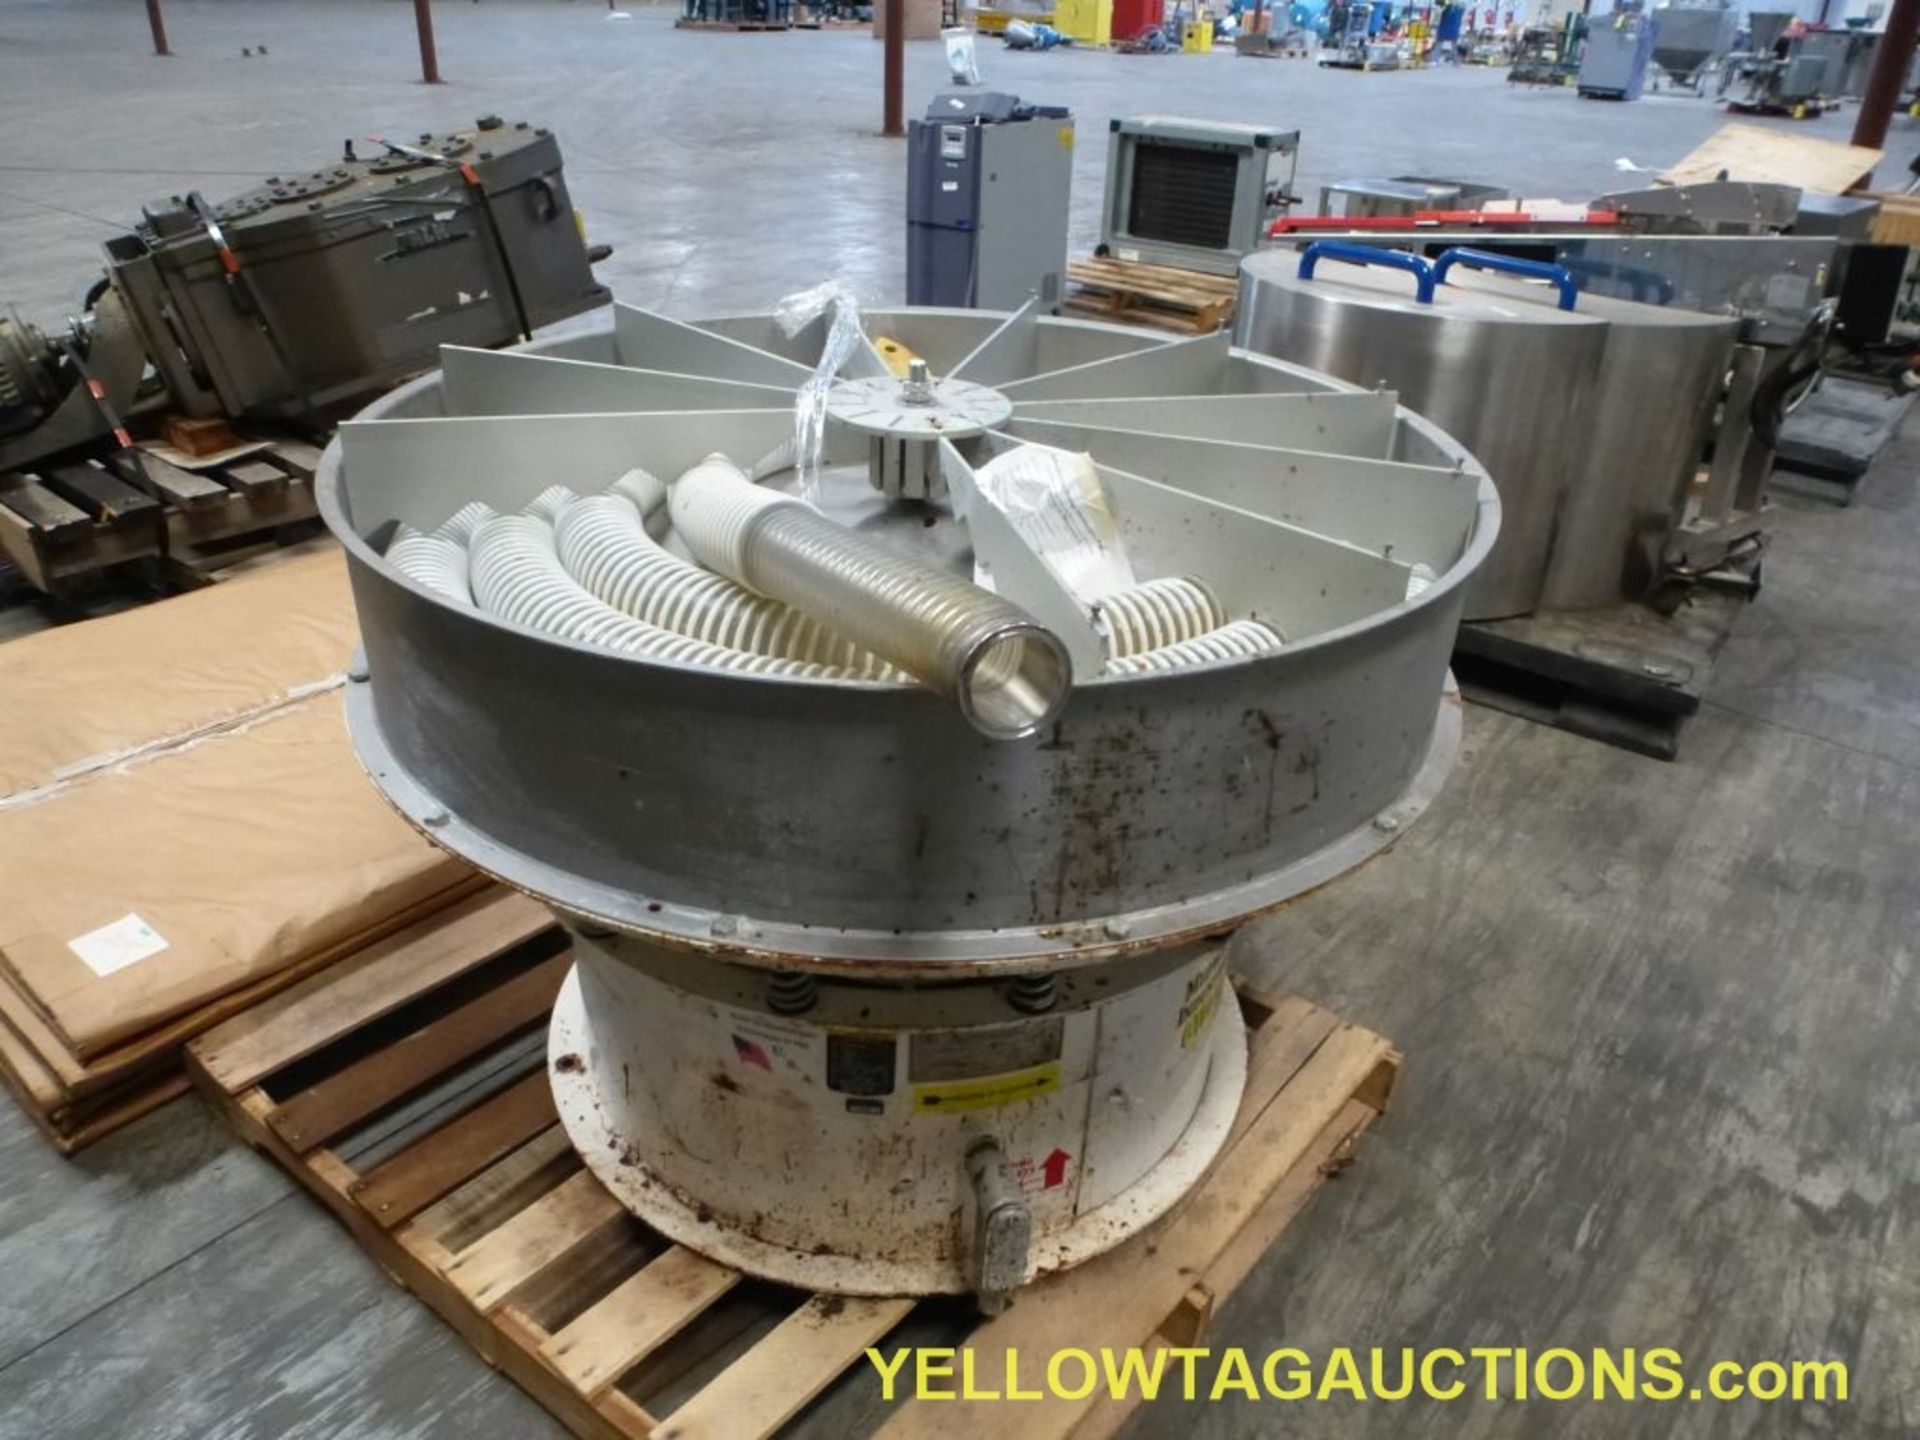 Midwestern Industries Vibrating Screen Separator|Model No. M-R 48S8; 200/460V; 9.7A|Lot Loading Fee: - Image 4 of 14